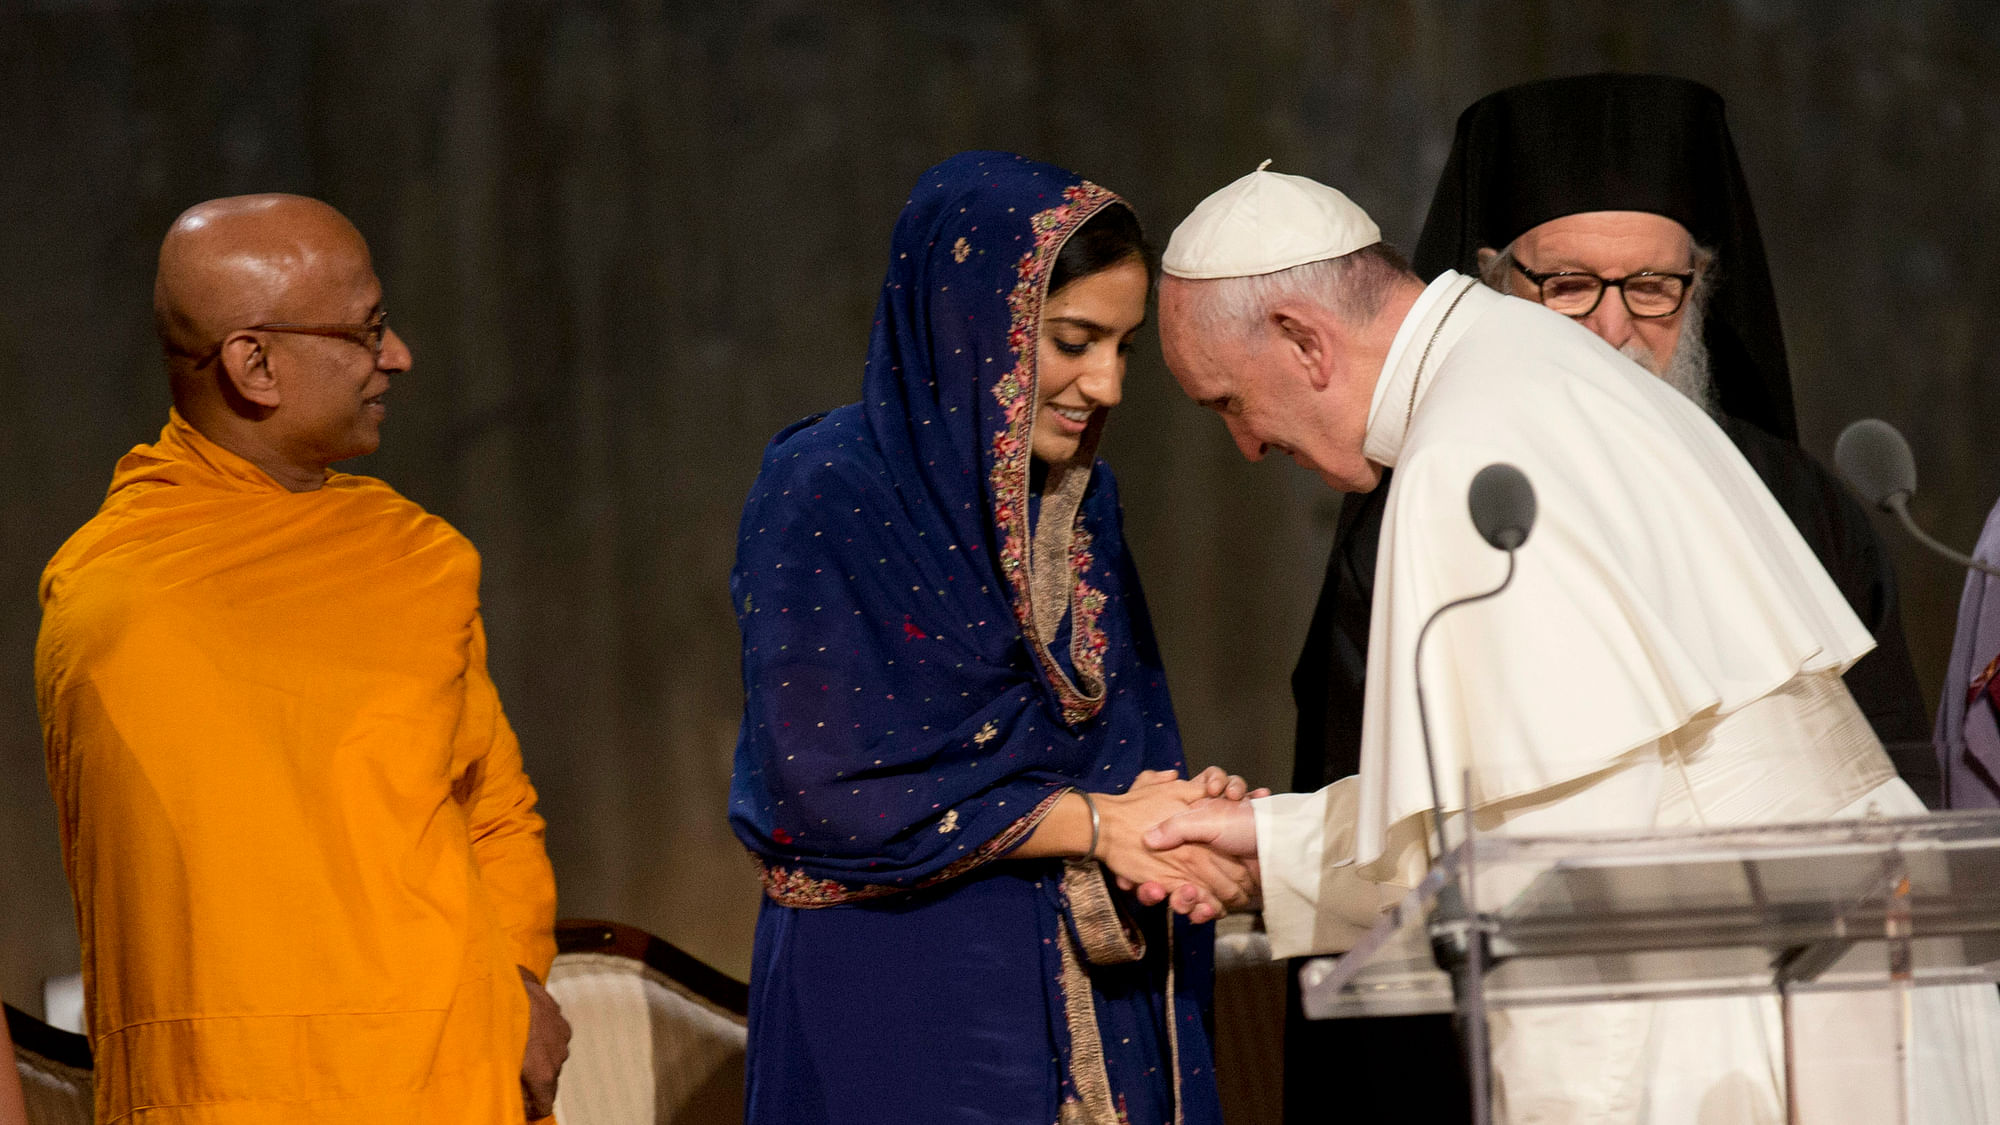 Pope Francis greets Gunisha Kaur, member of the Sikh community, at an interfaith service at the Sept. 11 Memorial Museum in New York on Friday. (Photo: AP)